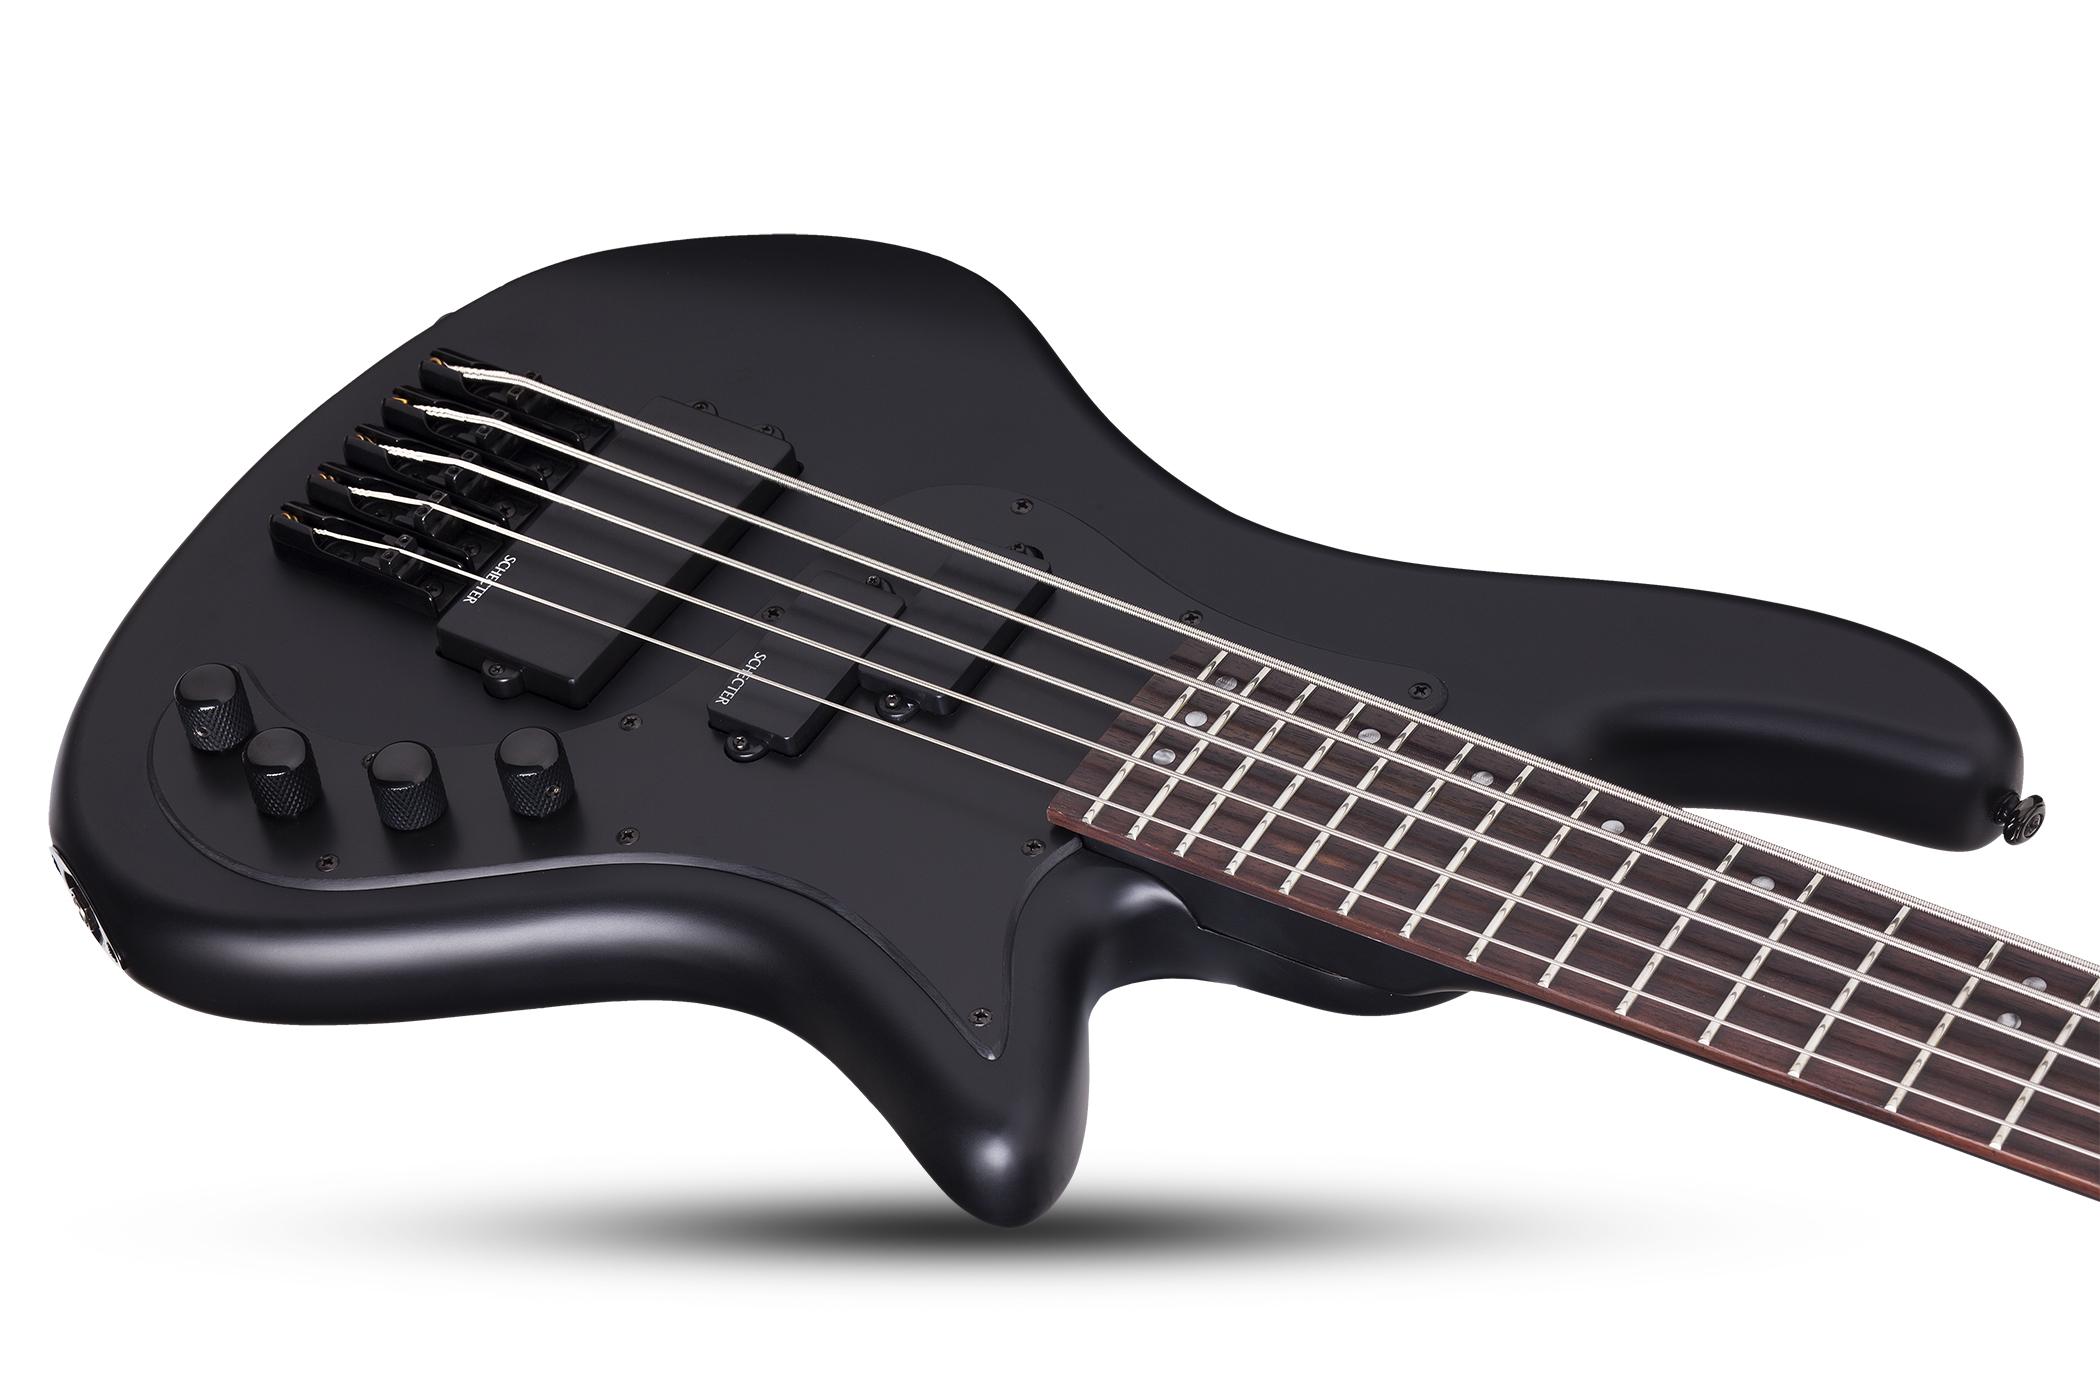 Schecter Stiletto Stealth-5 5c Active Rw - Satin Black - Solid body electric bass - Variation 2